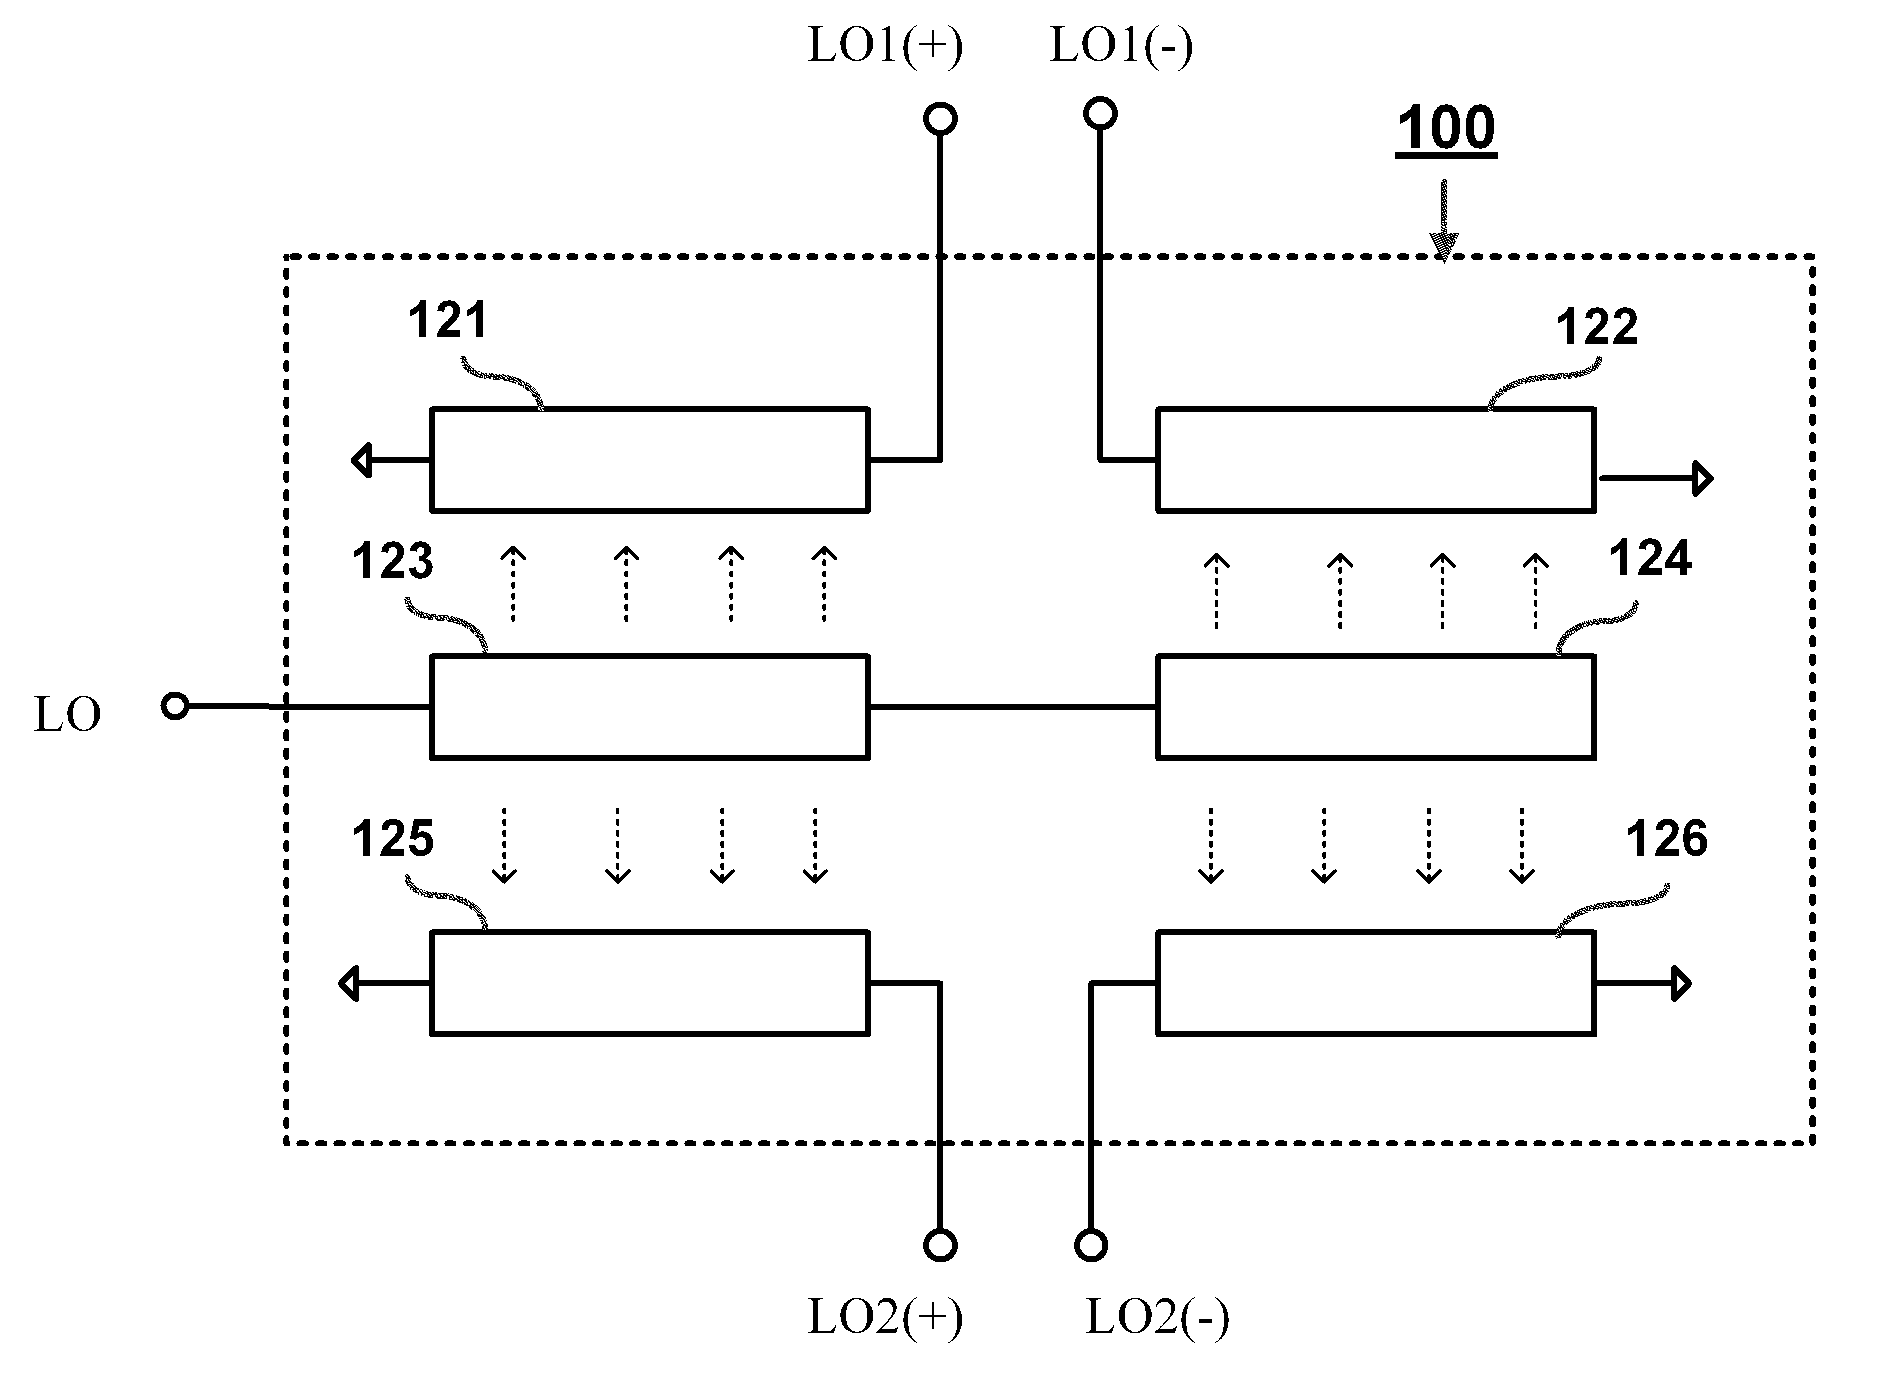 Miniaturized dual-balanced mixer circuit based on a double spiral layout architecture